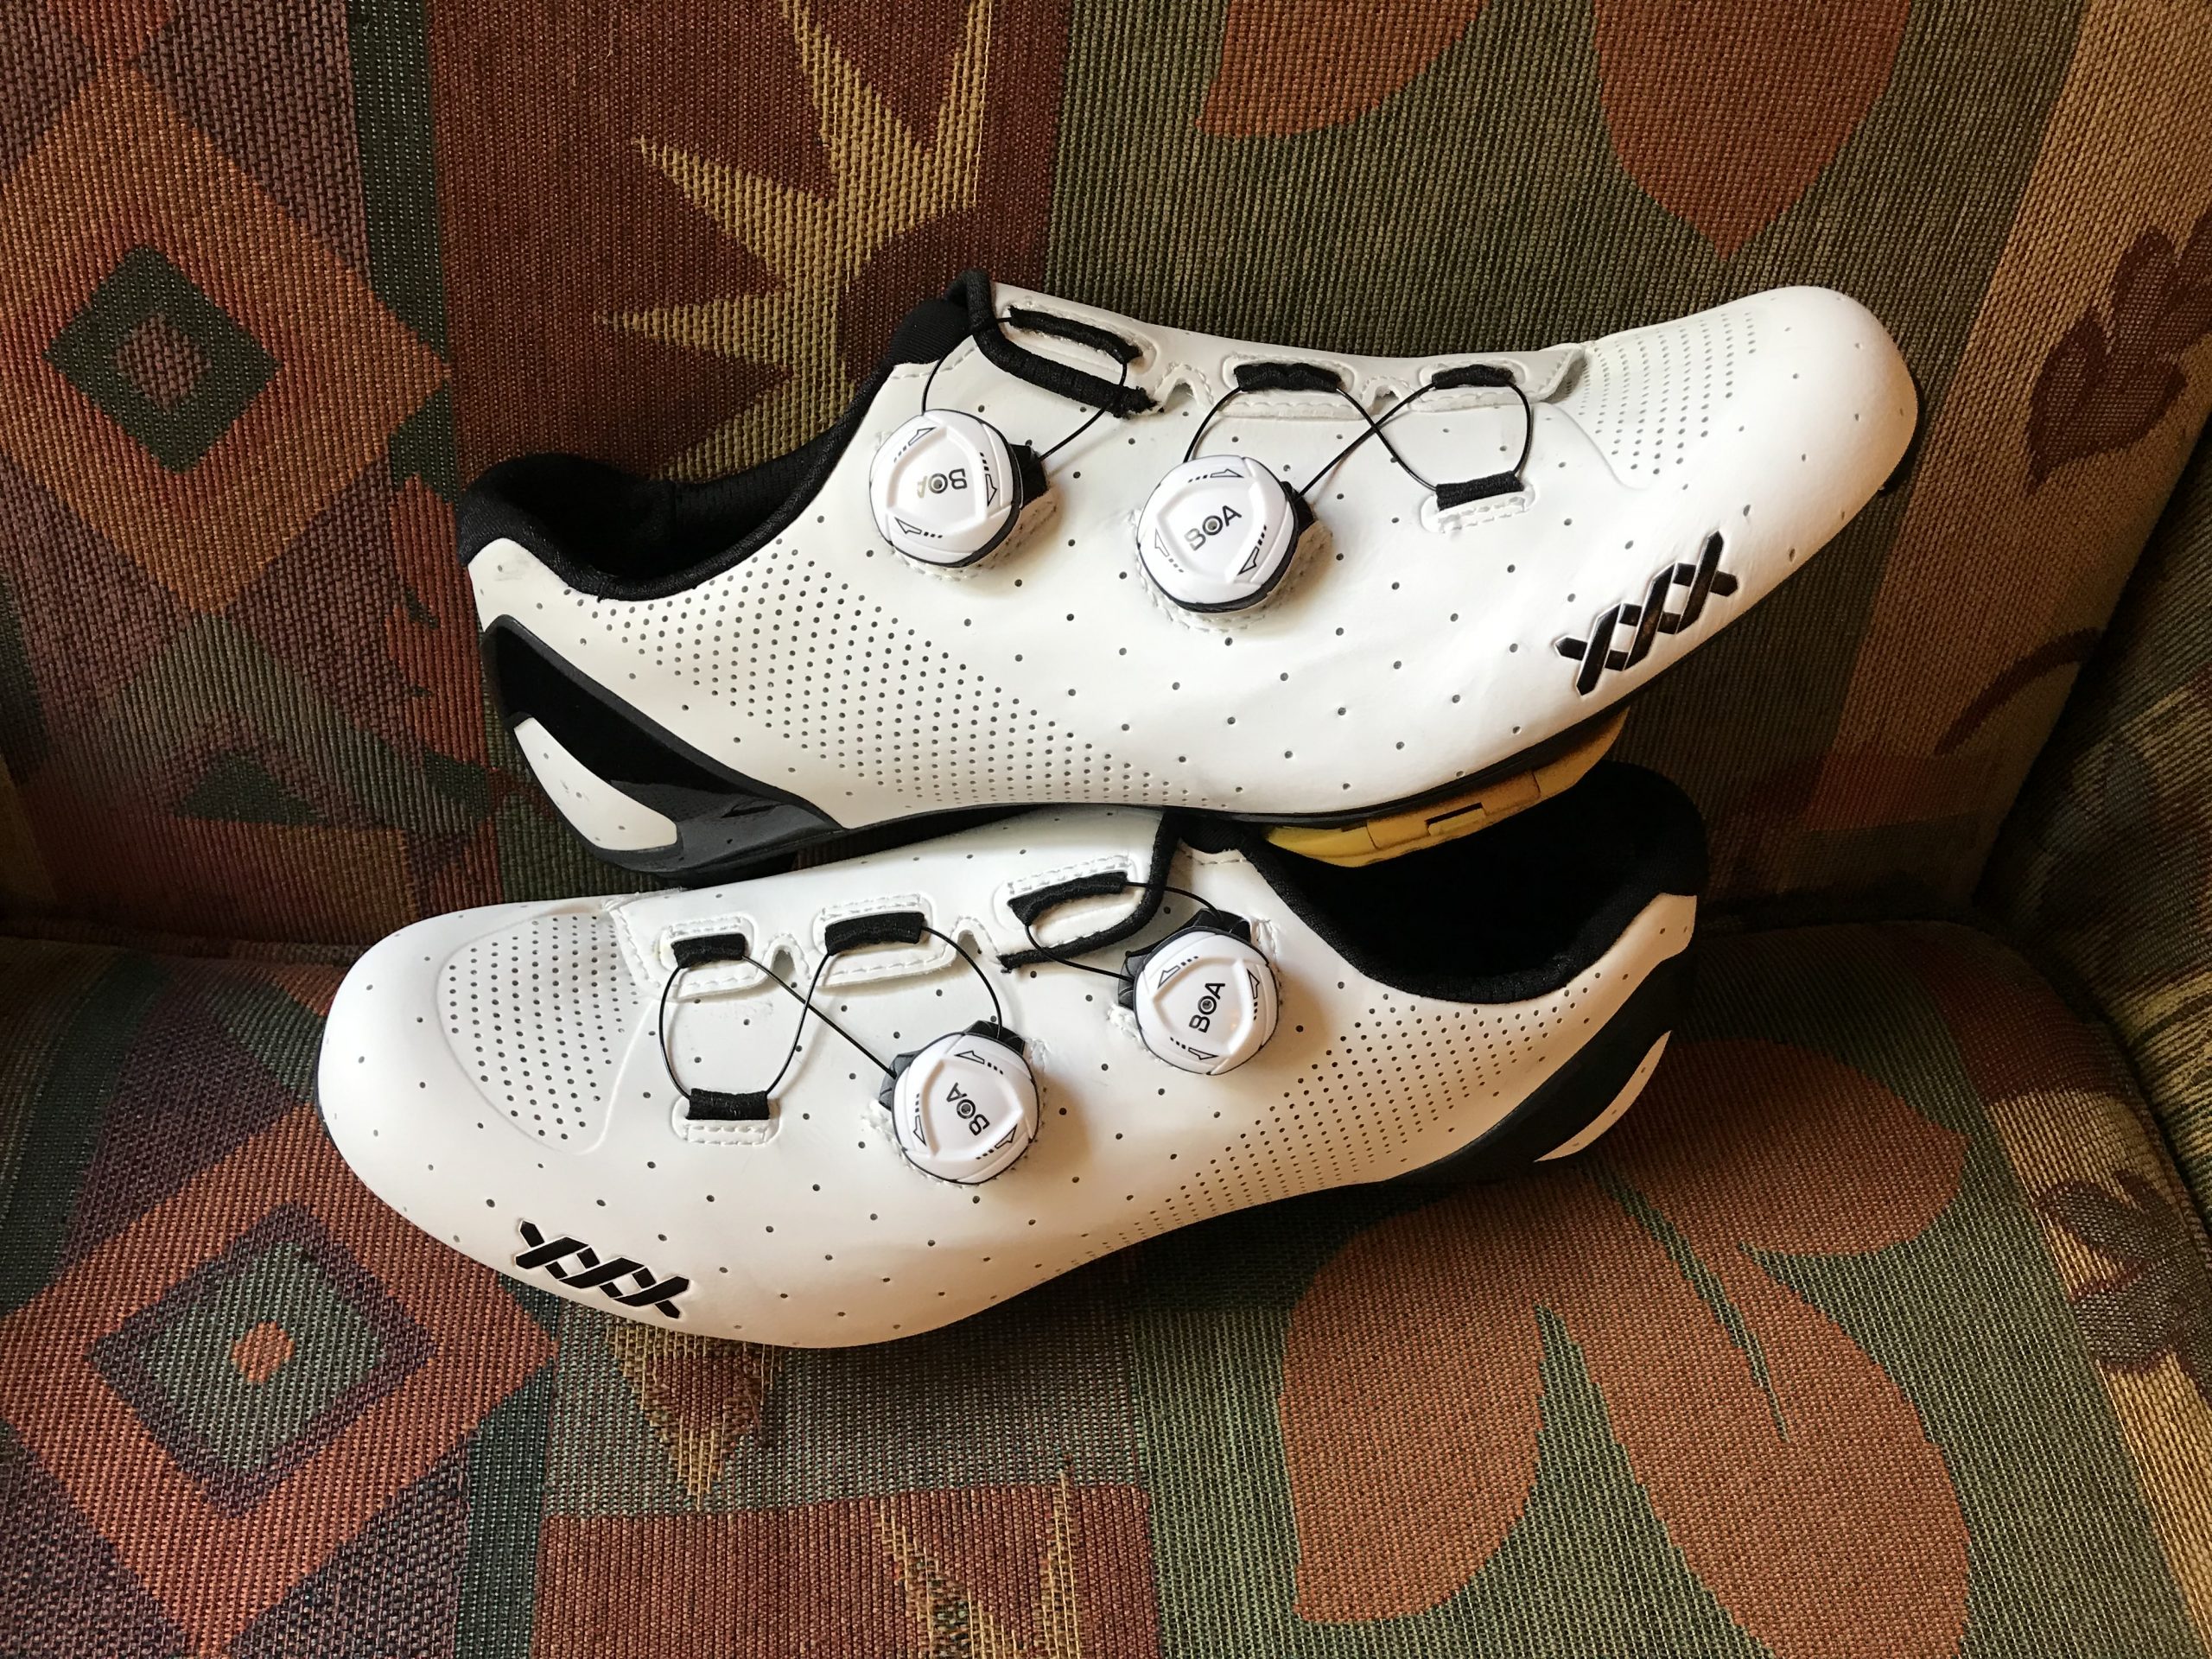 Rapha Pro Team Road Cycling Shoes